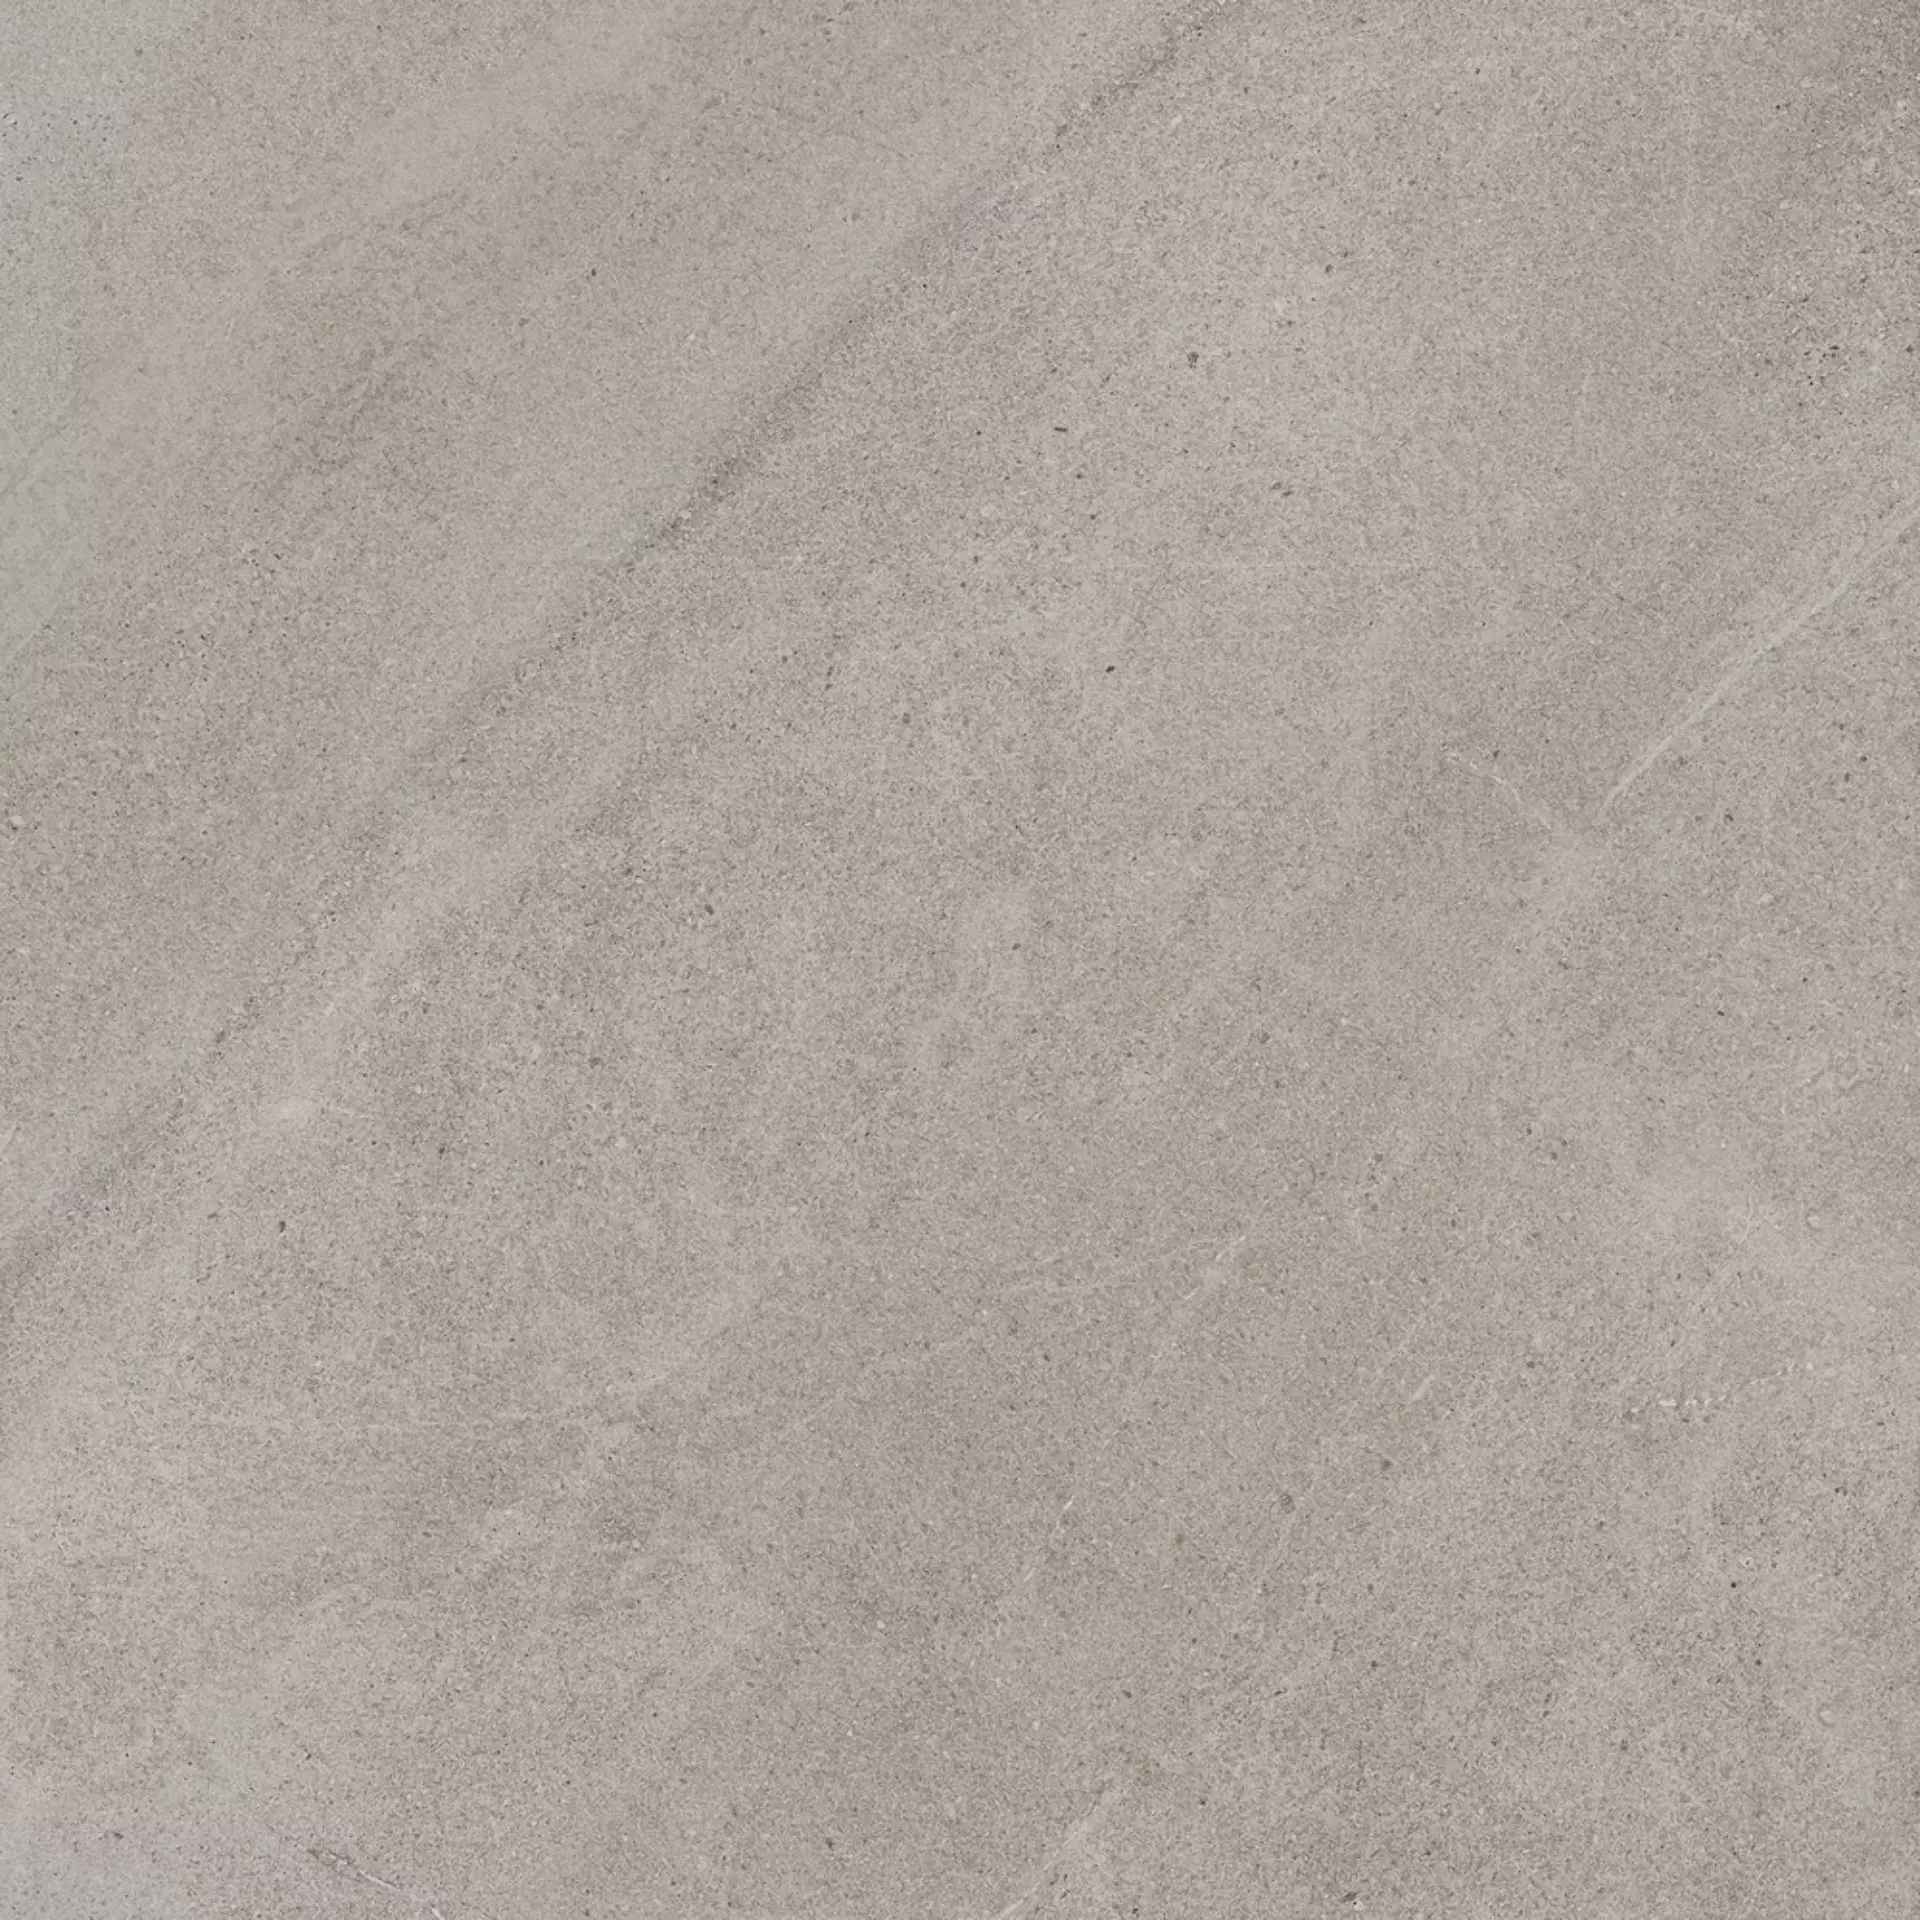 Cottodeste Limestone Oyster Honed Protect EGWLSH2 60x60cm rectified 14mm